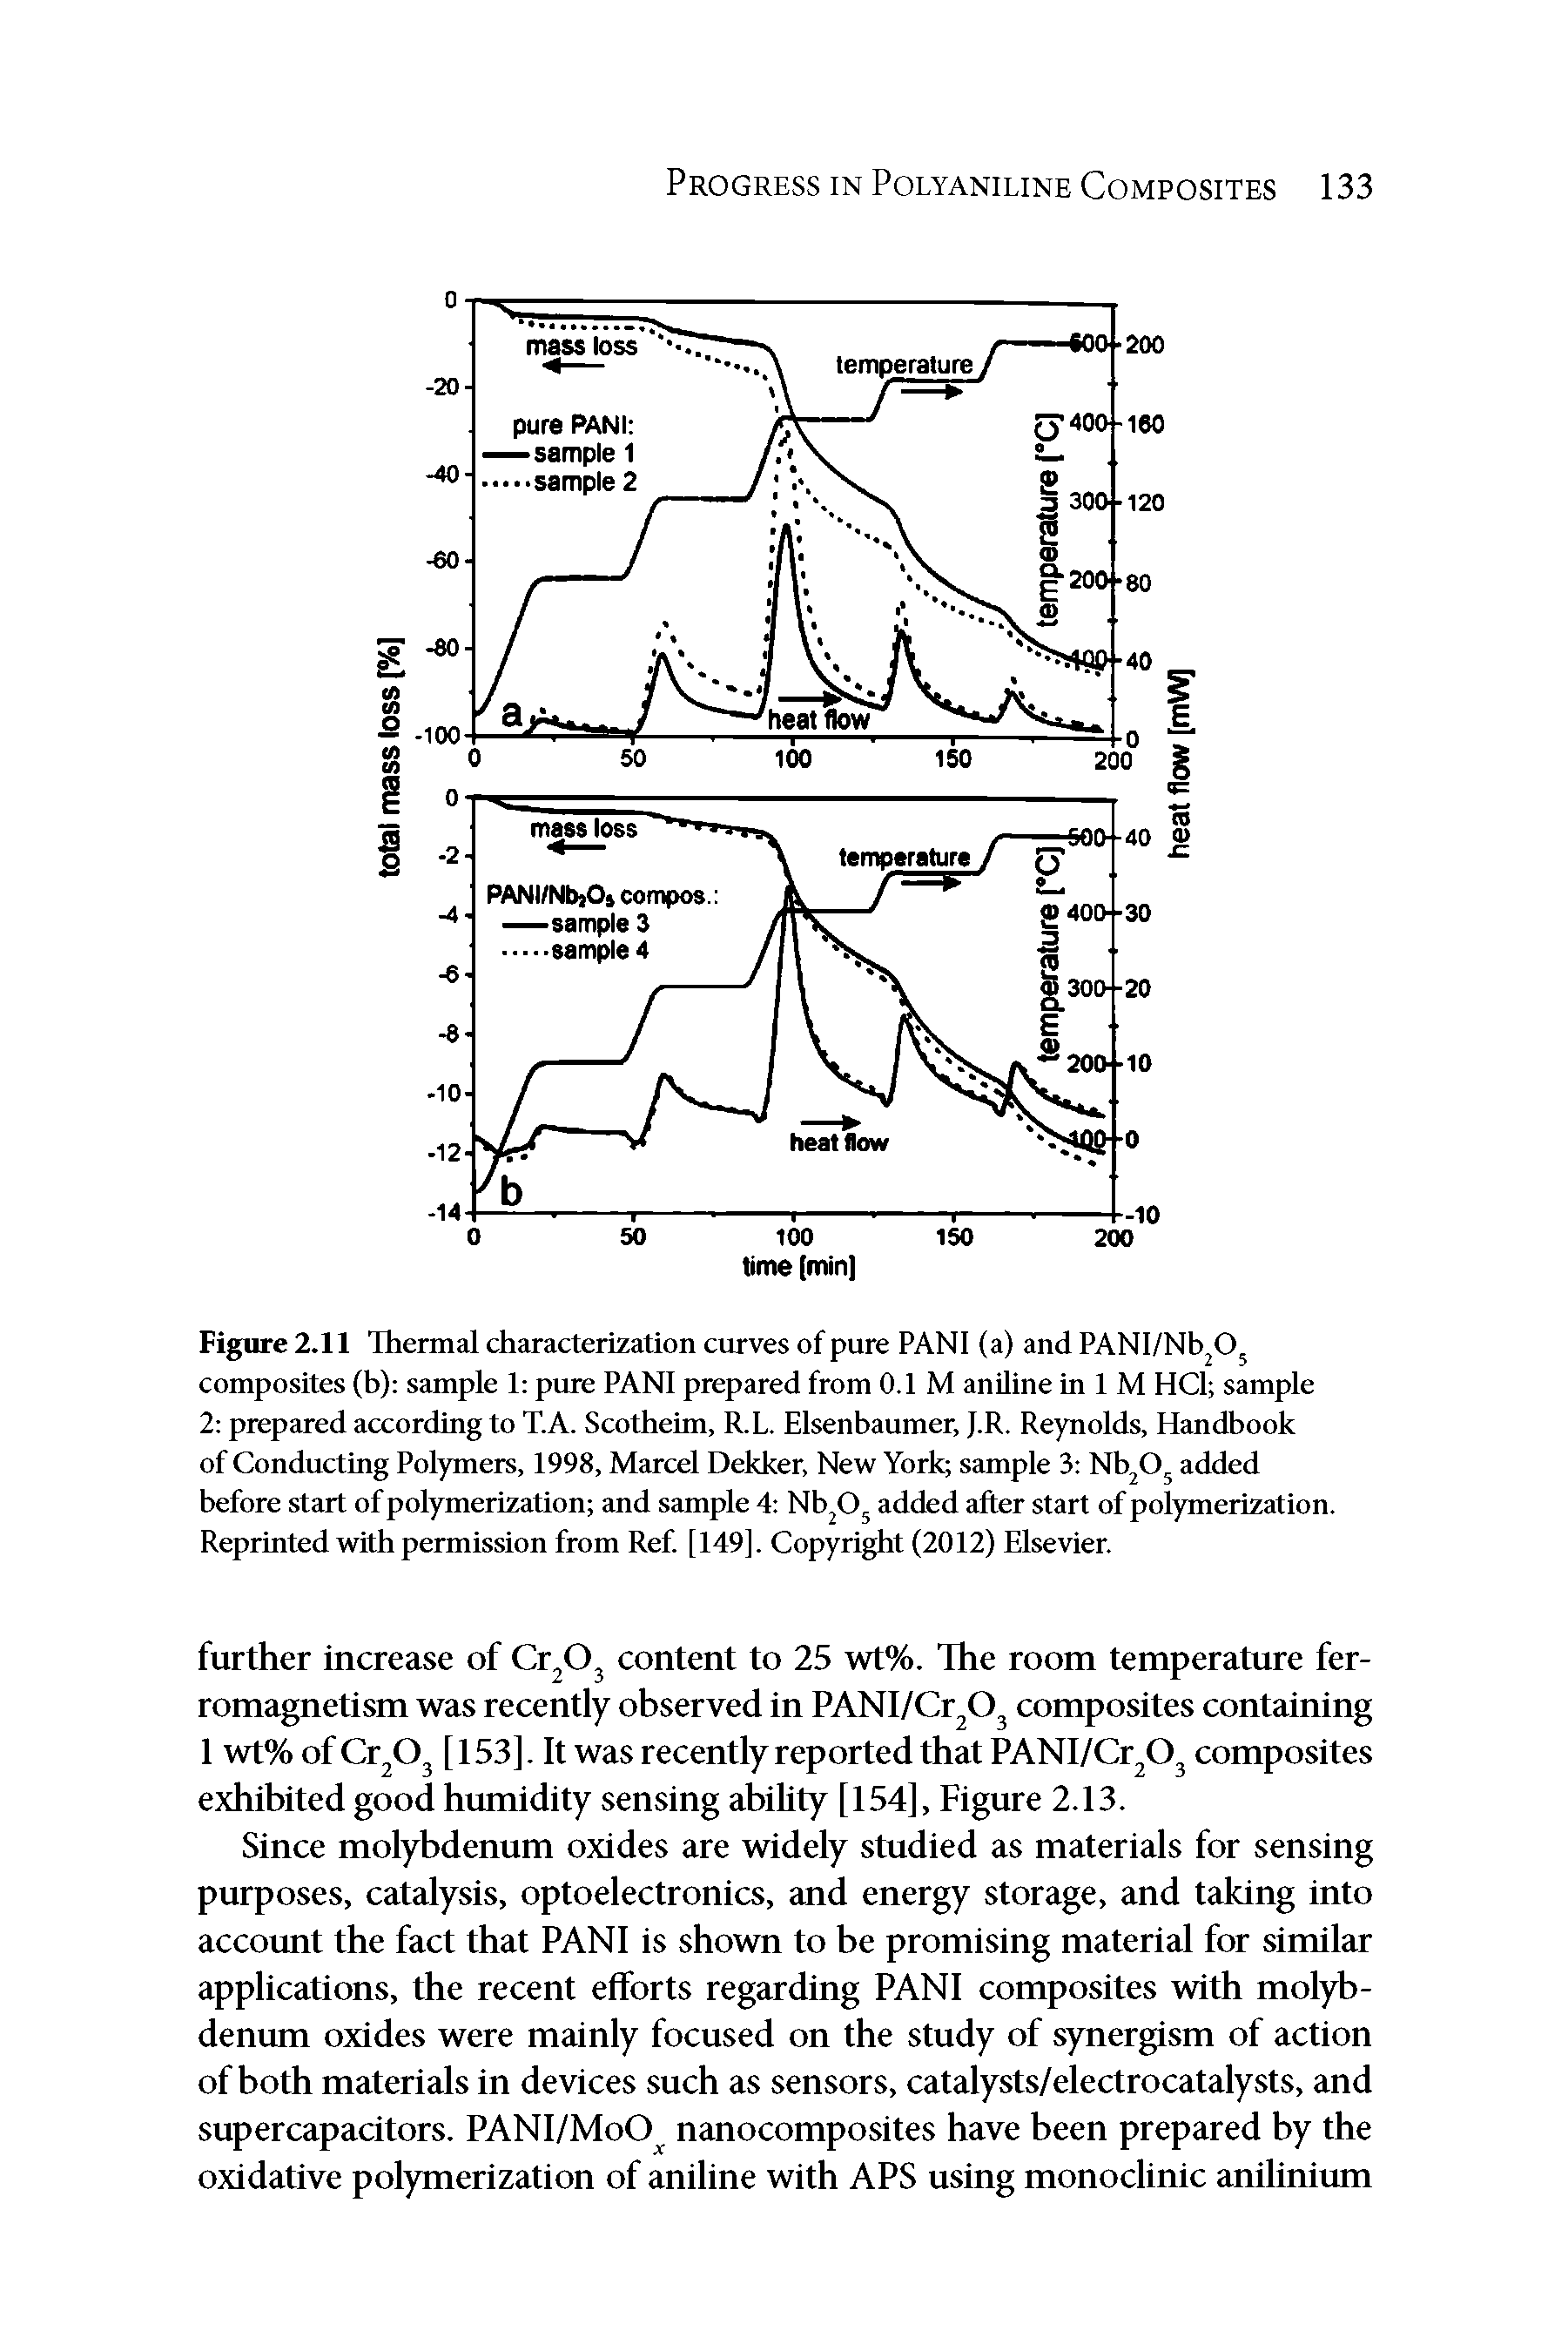 Figure 2.11 Thermal characteri2ation curves of pure PANI (a) and PANI/Nb O composites (b) sample 1 pure PANI prepared from 0.1 M aniline in 1 M HCl sample 2 prepared according to T.A. Scotheim, R.L. Elsenbaumer, J.R. Reynolds, Handbook of Conducting Polymers, 1998, Marcel Dekker, New York sample 3 Nb O added before start of polymerization and sample 4 Nb O added after start of polymerization. Reprinted with permission from Ref. [149]. Copyright (2012) Elsevier.